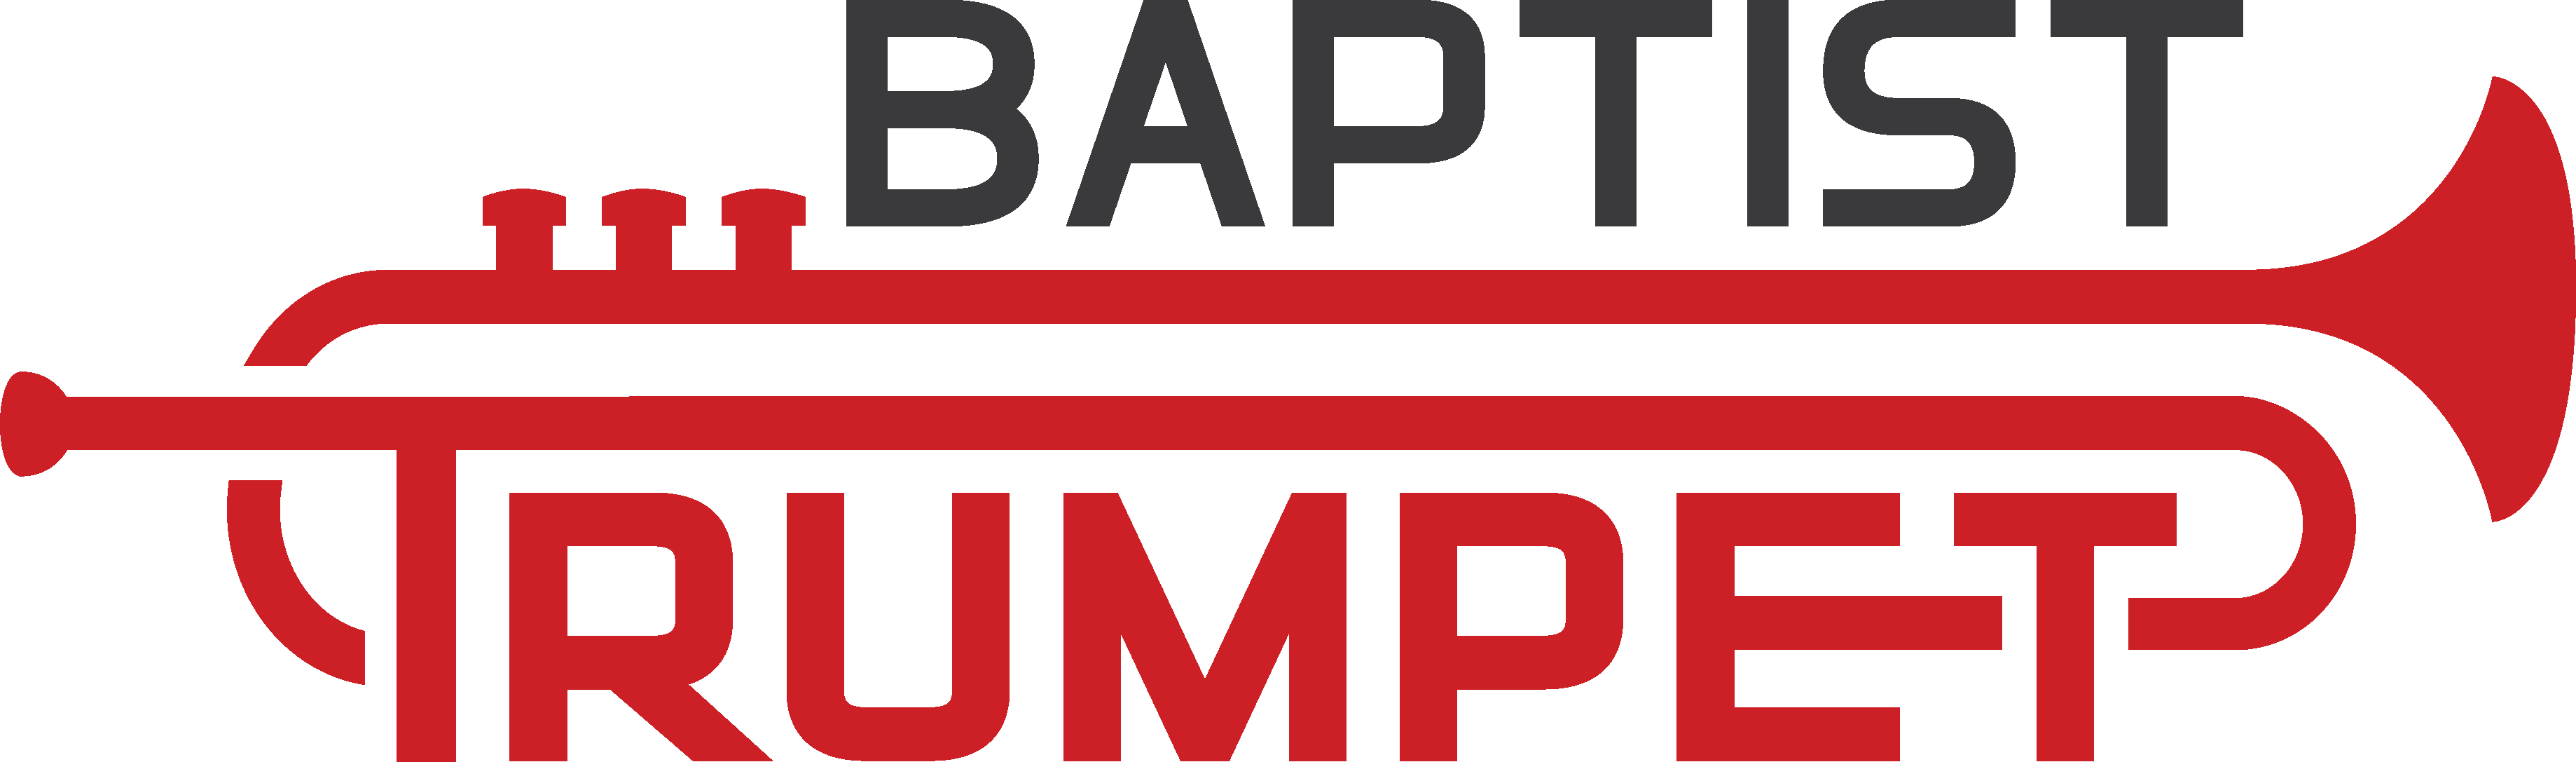 Your weekly BMA newspaper - Baptist Trumpet